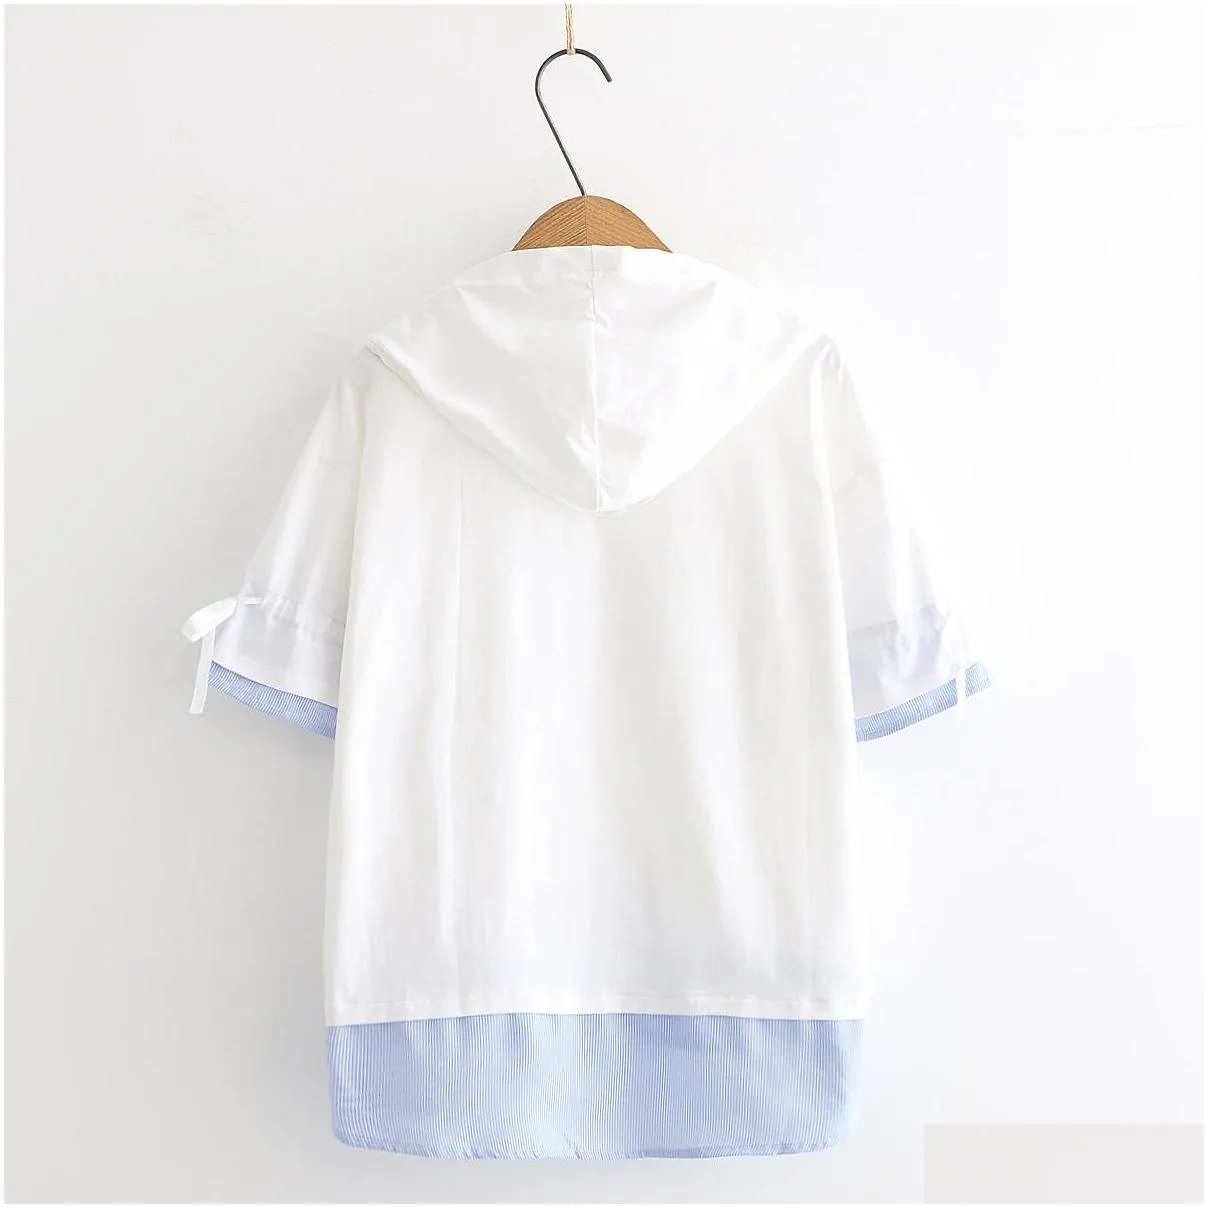 student gilrs short sleeve tops tees 2020 new arrival soft cotton material meshable